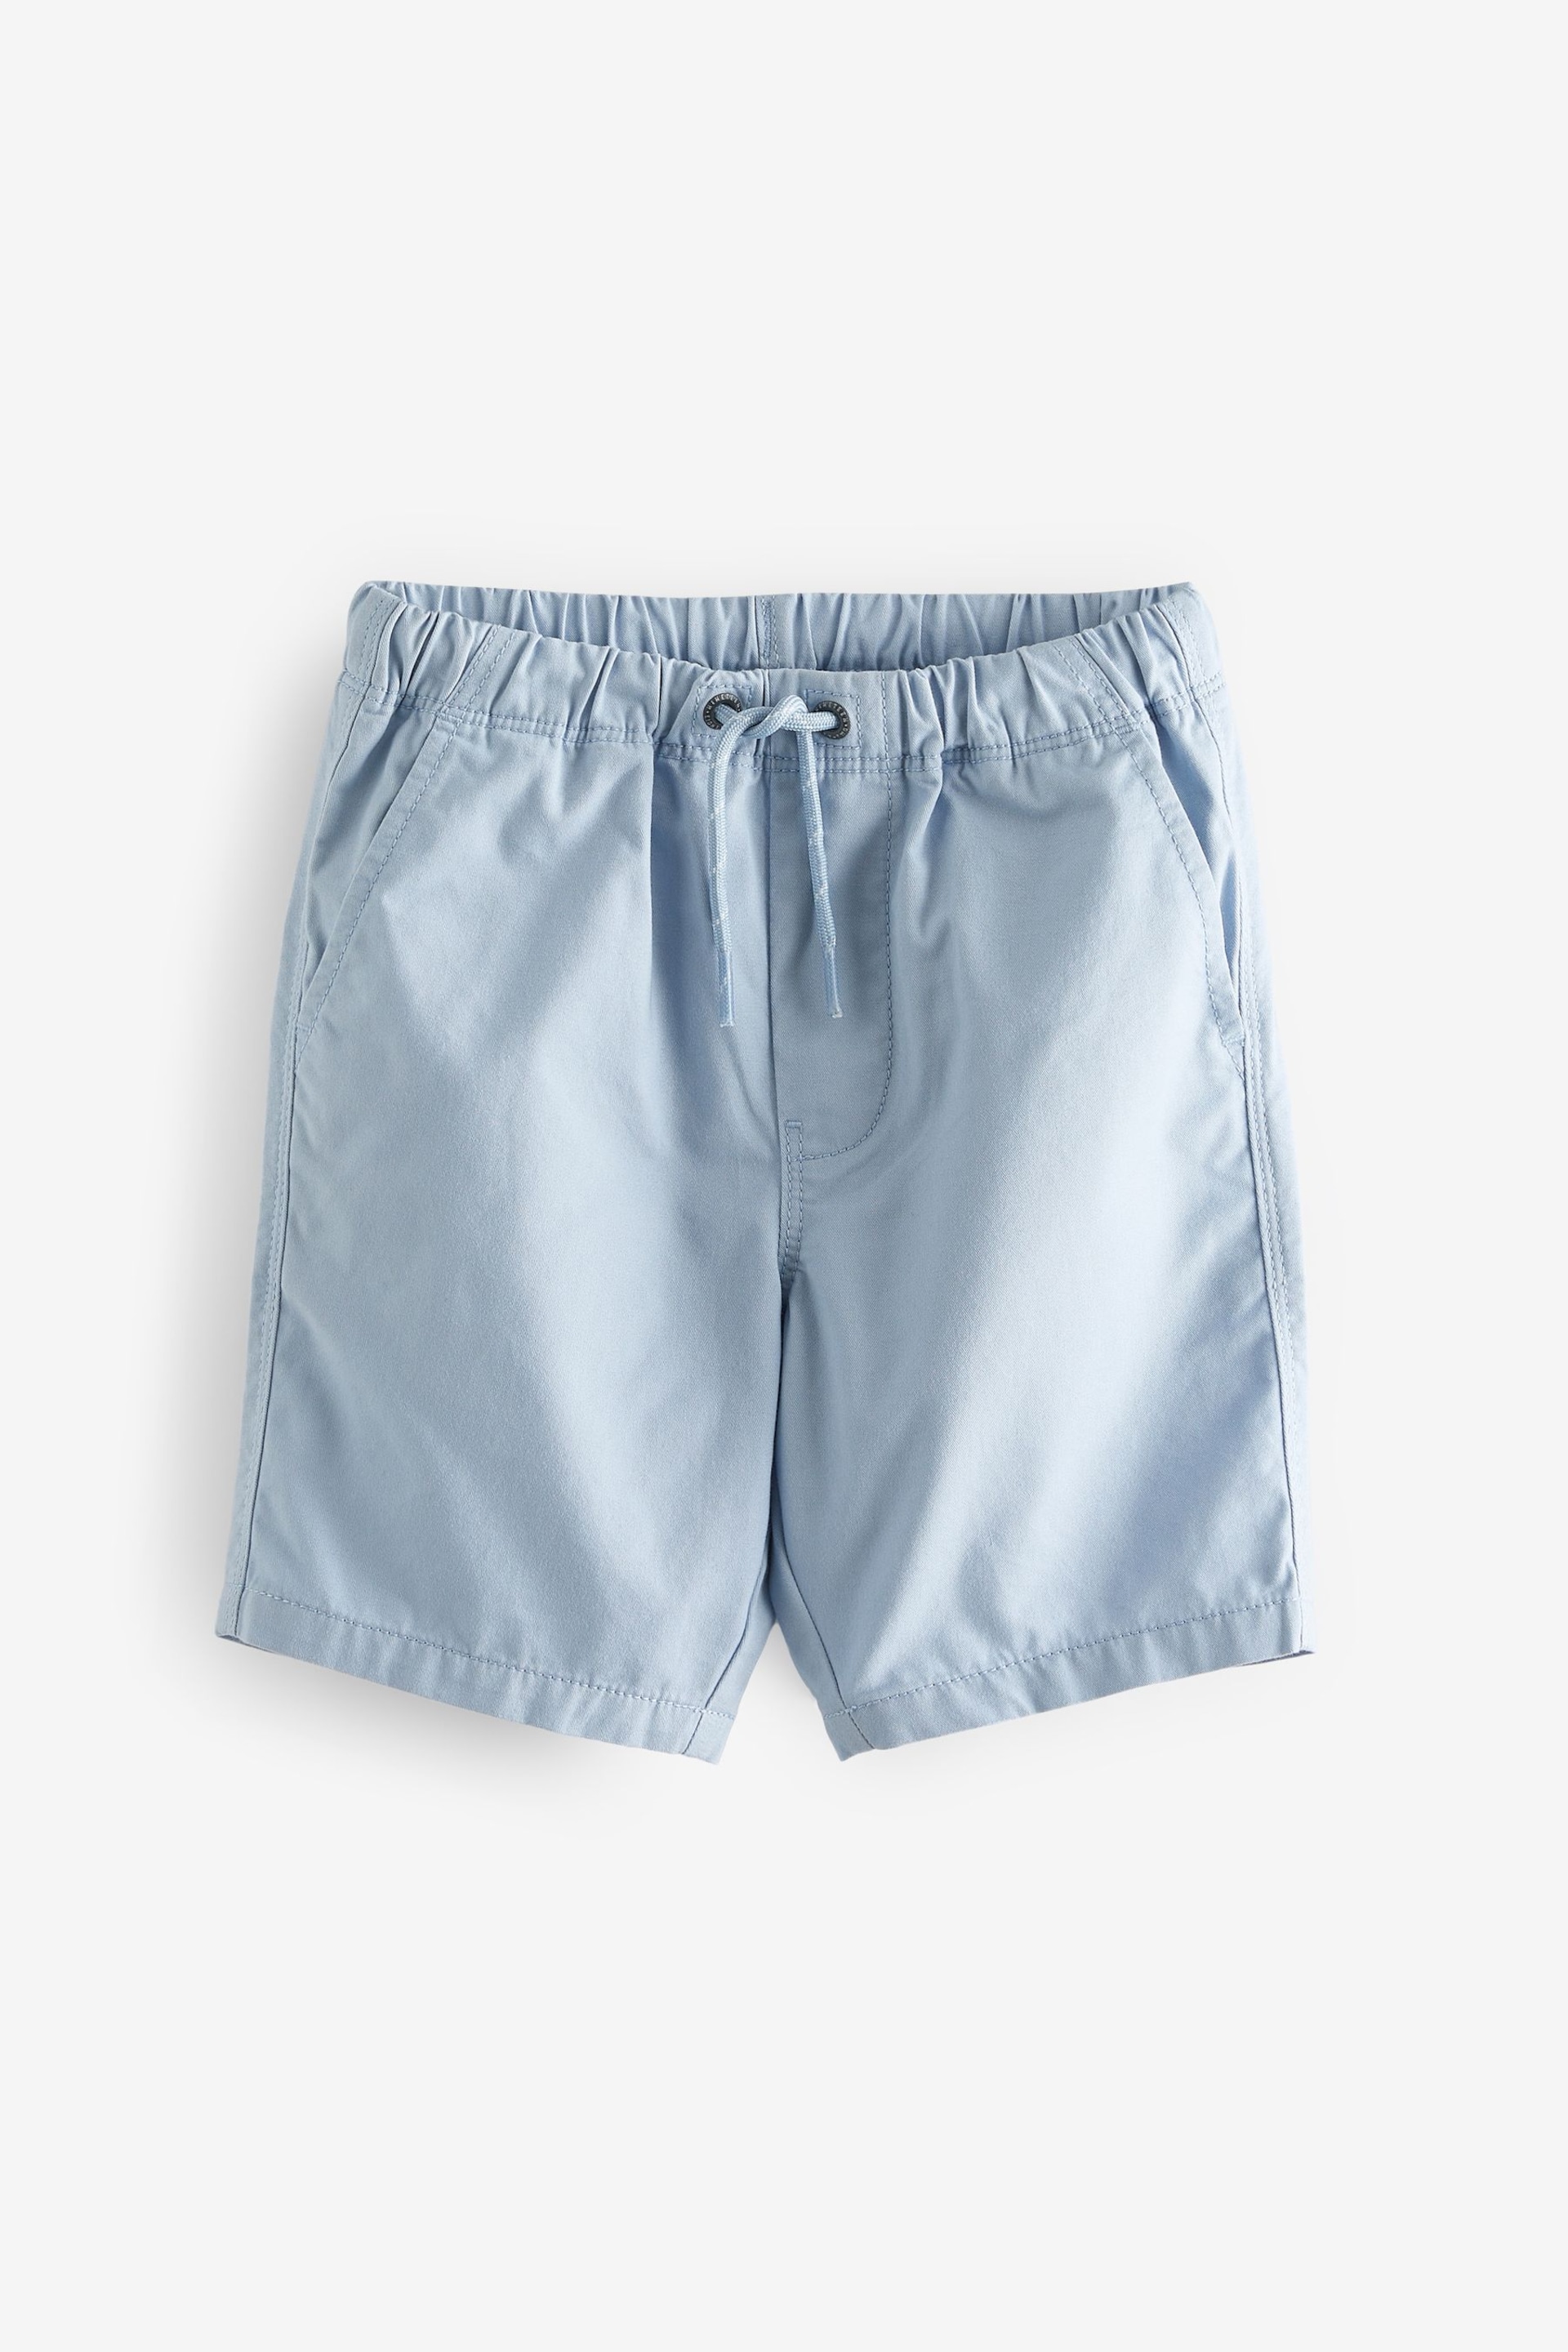 Blue Single Pull-On Shorts (3-16yrs) - Image 1 of 3